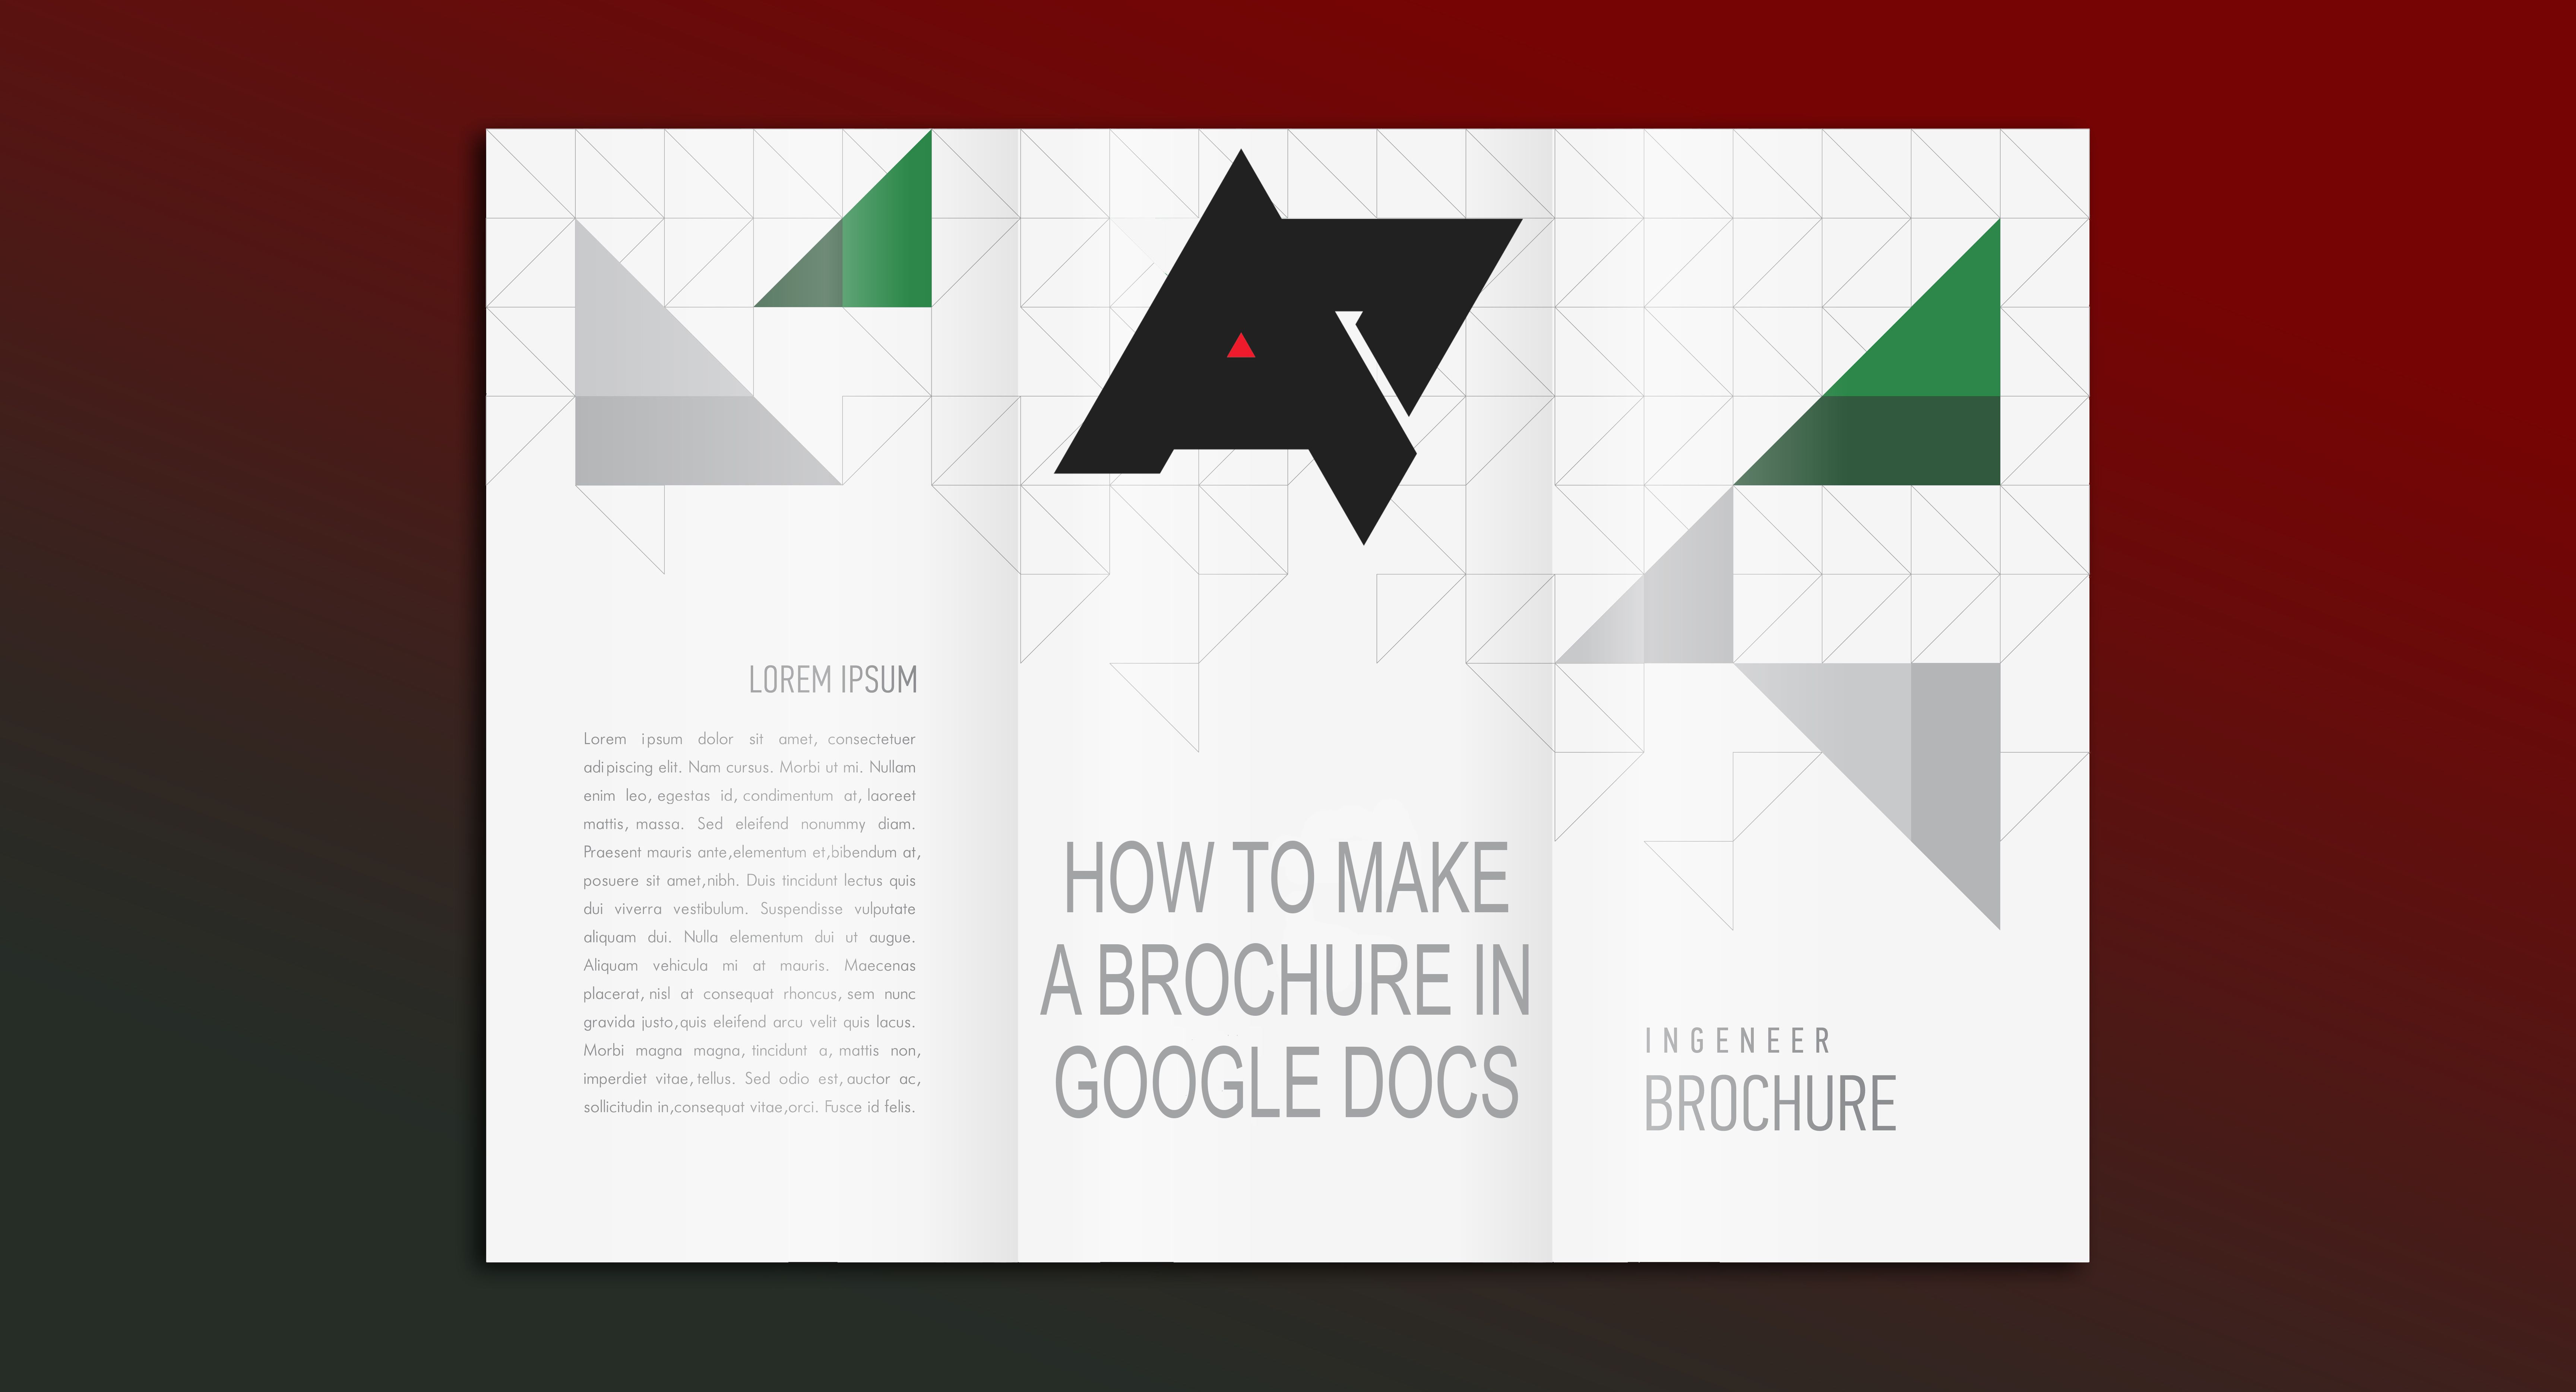 An example of a brochure created in Google Docs